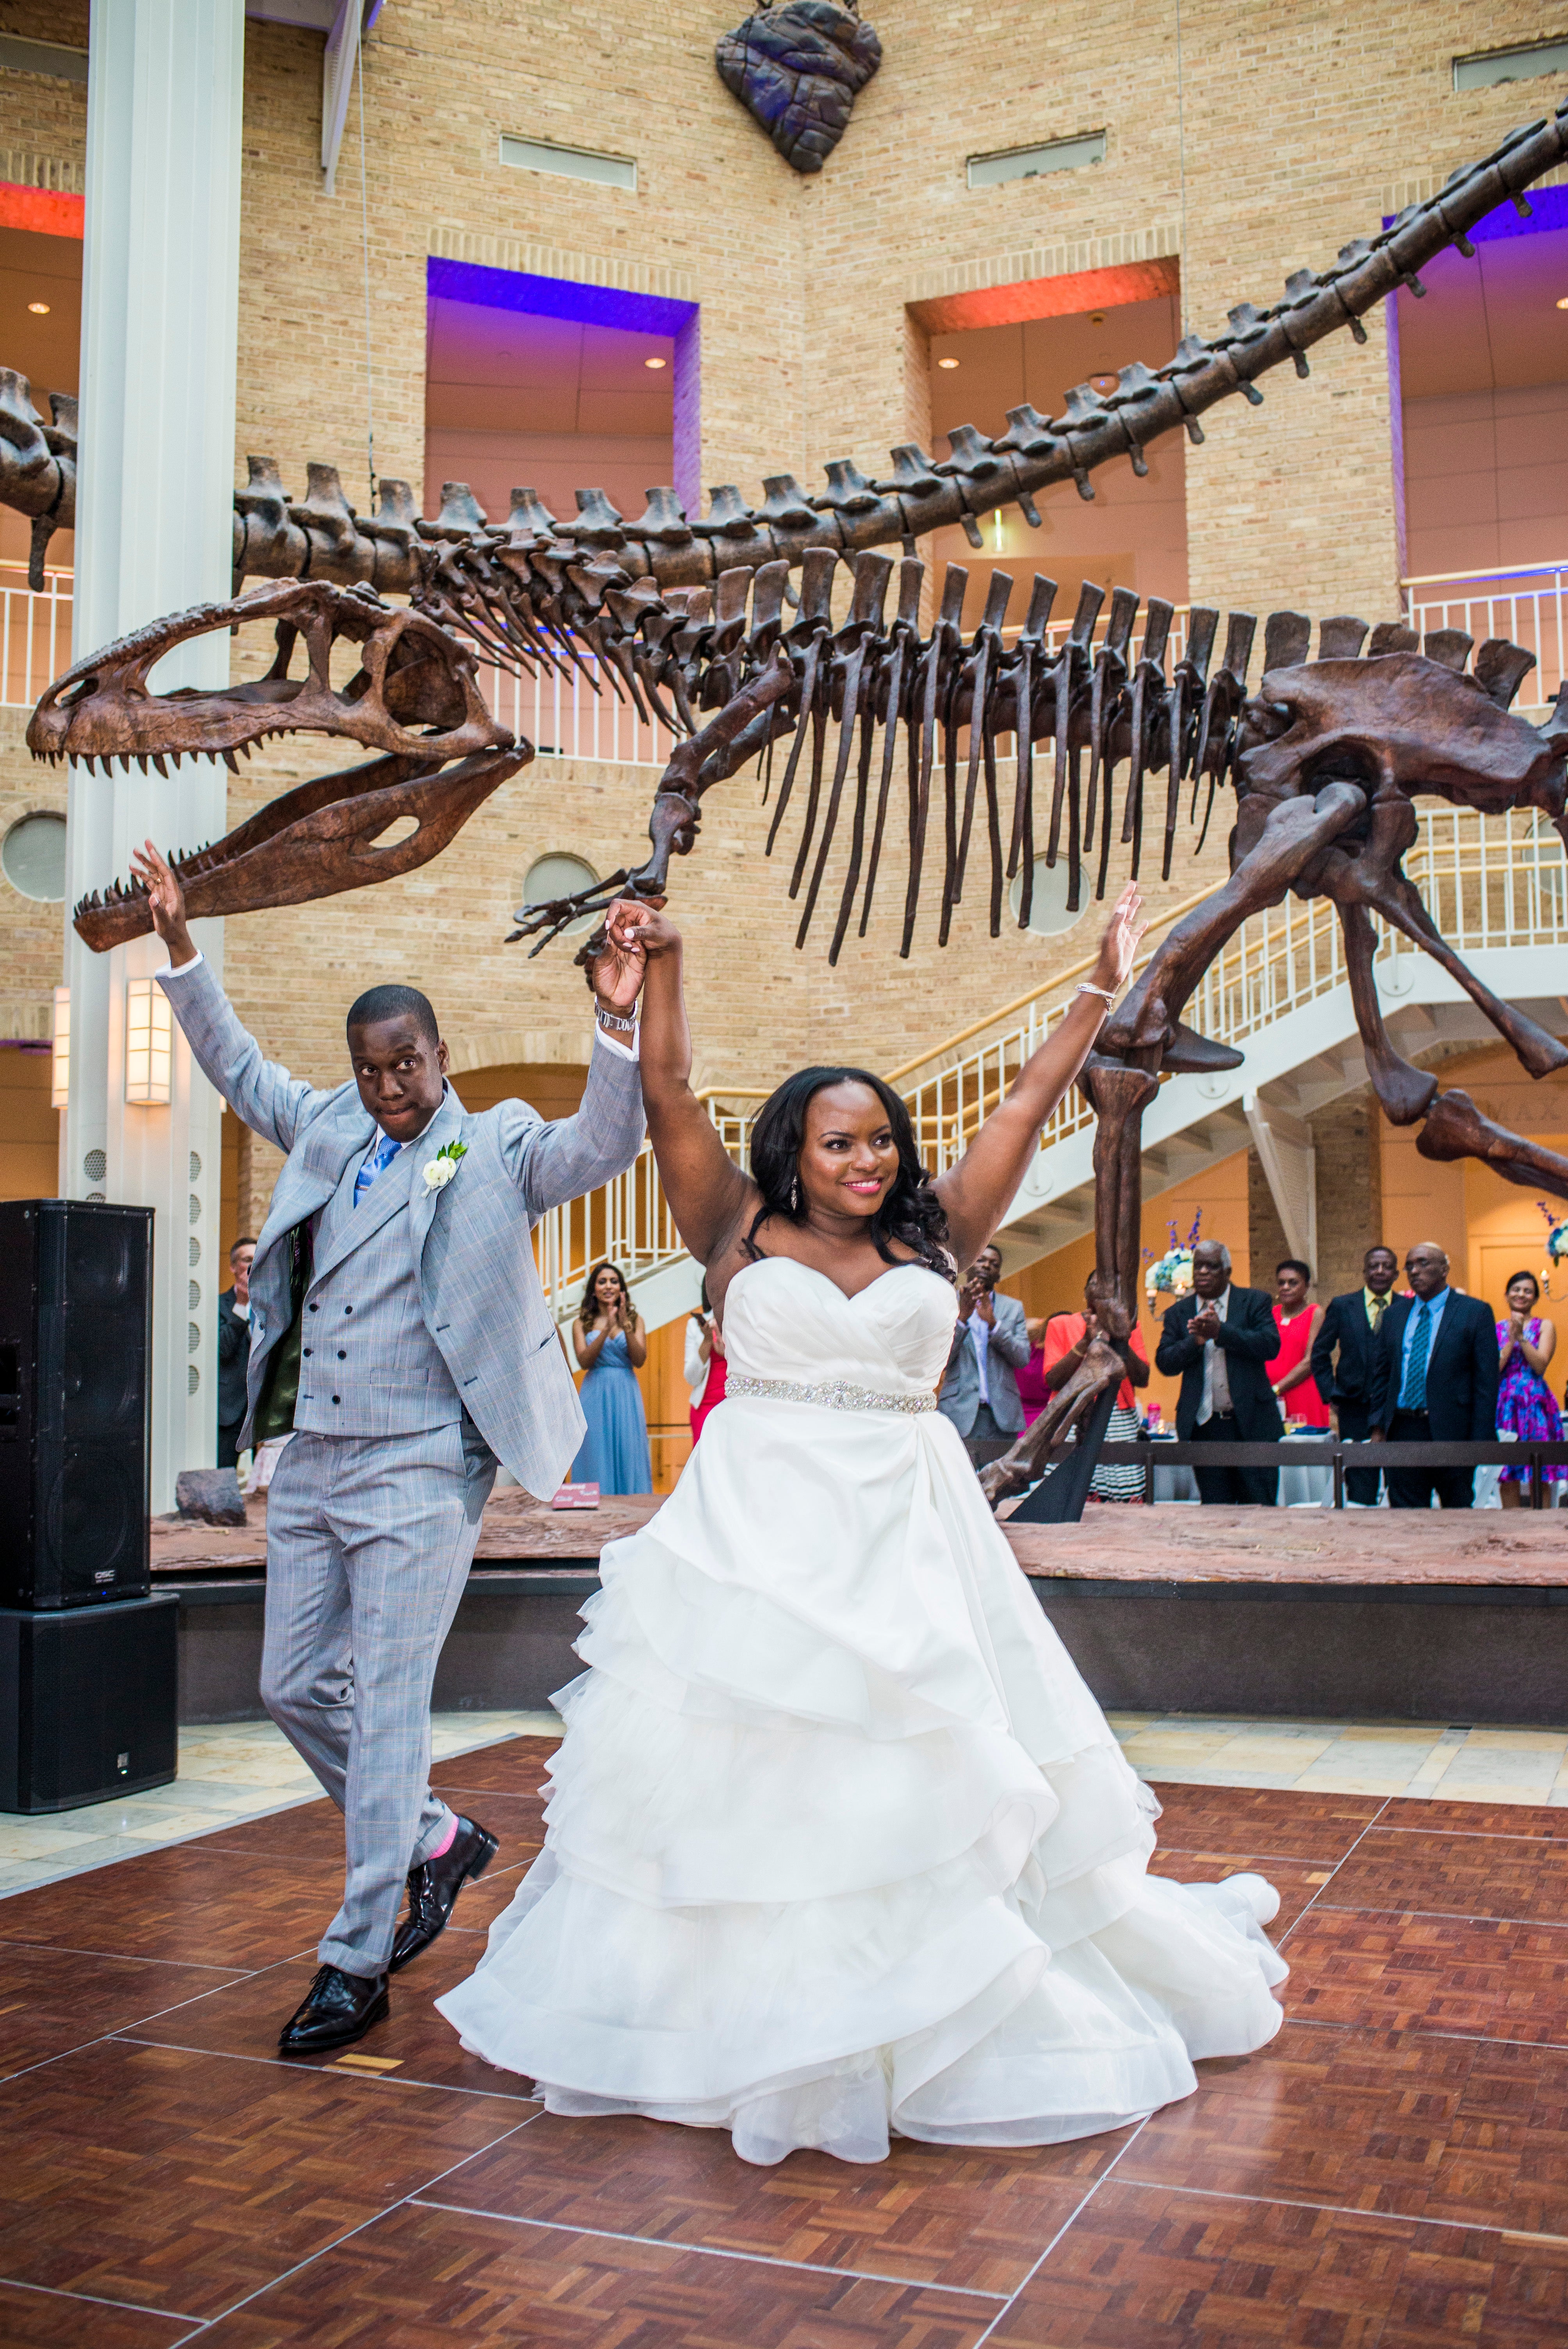 Bridal Bliss: Dionne and Maurice's Atlanta Museum Wedding Was Everything
